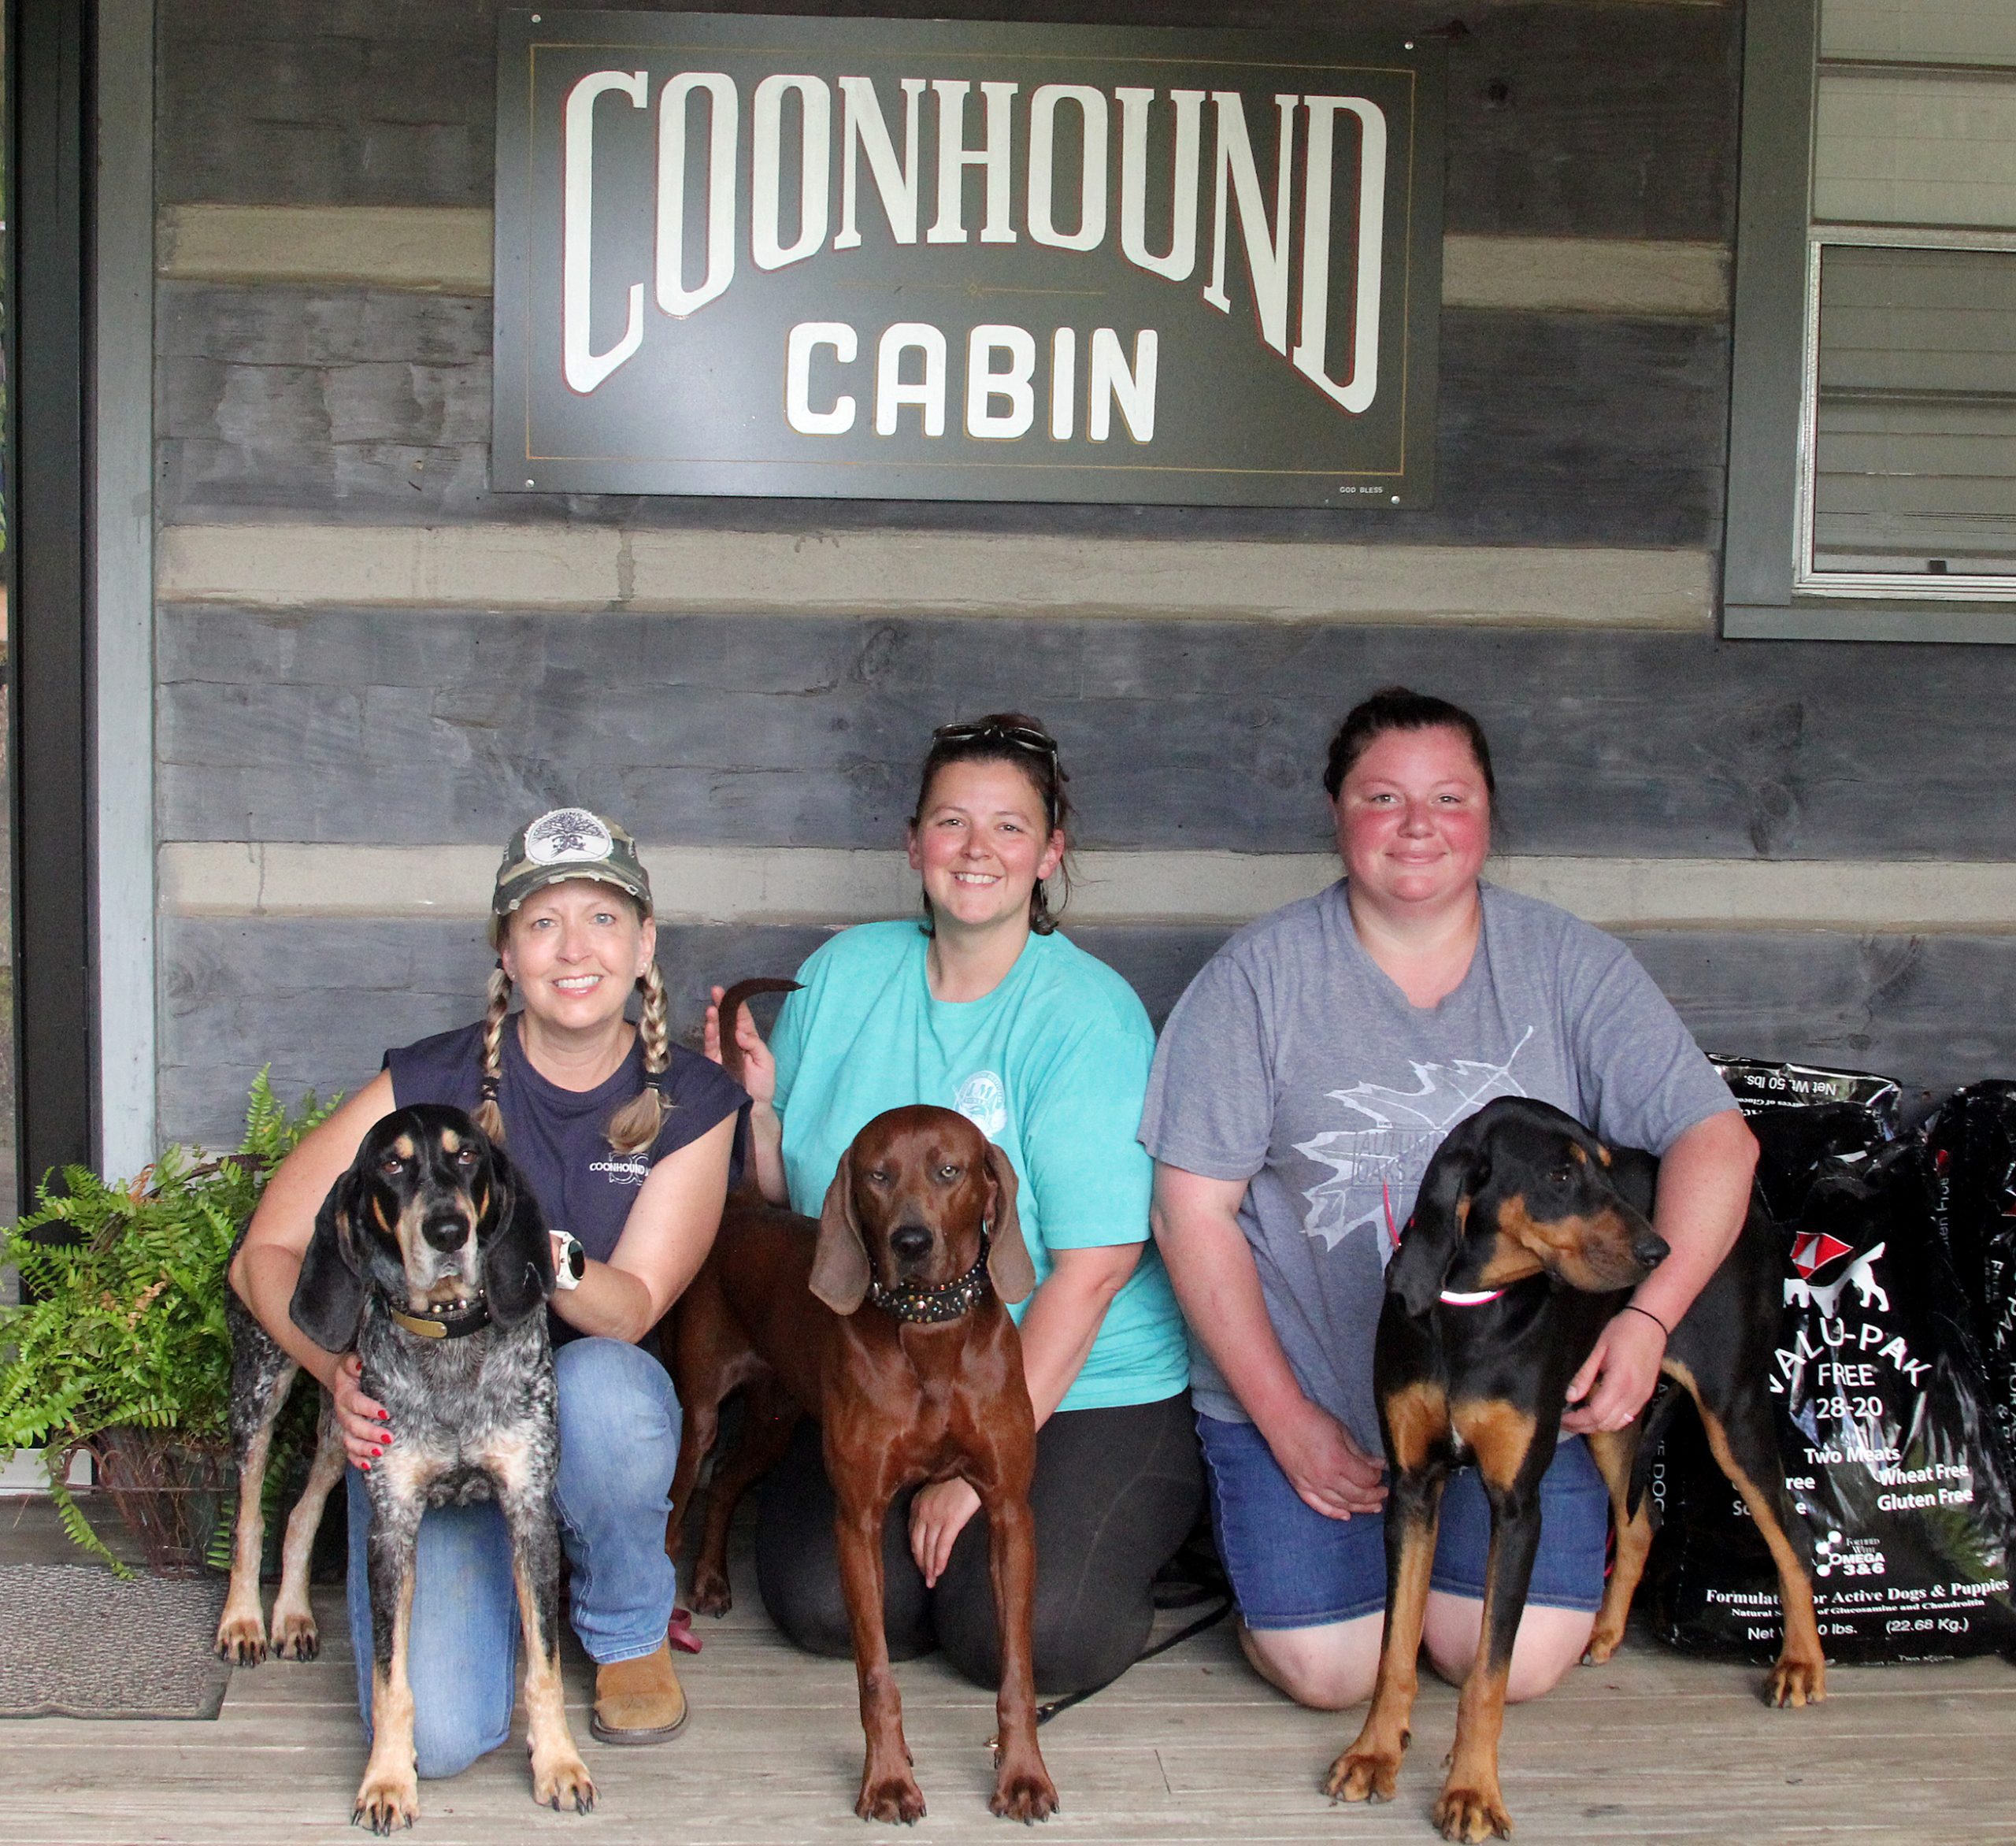 Coonhoun Cabin attracts Southern Heritage Show to Alabama